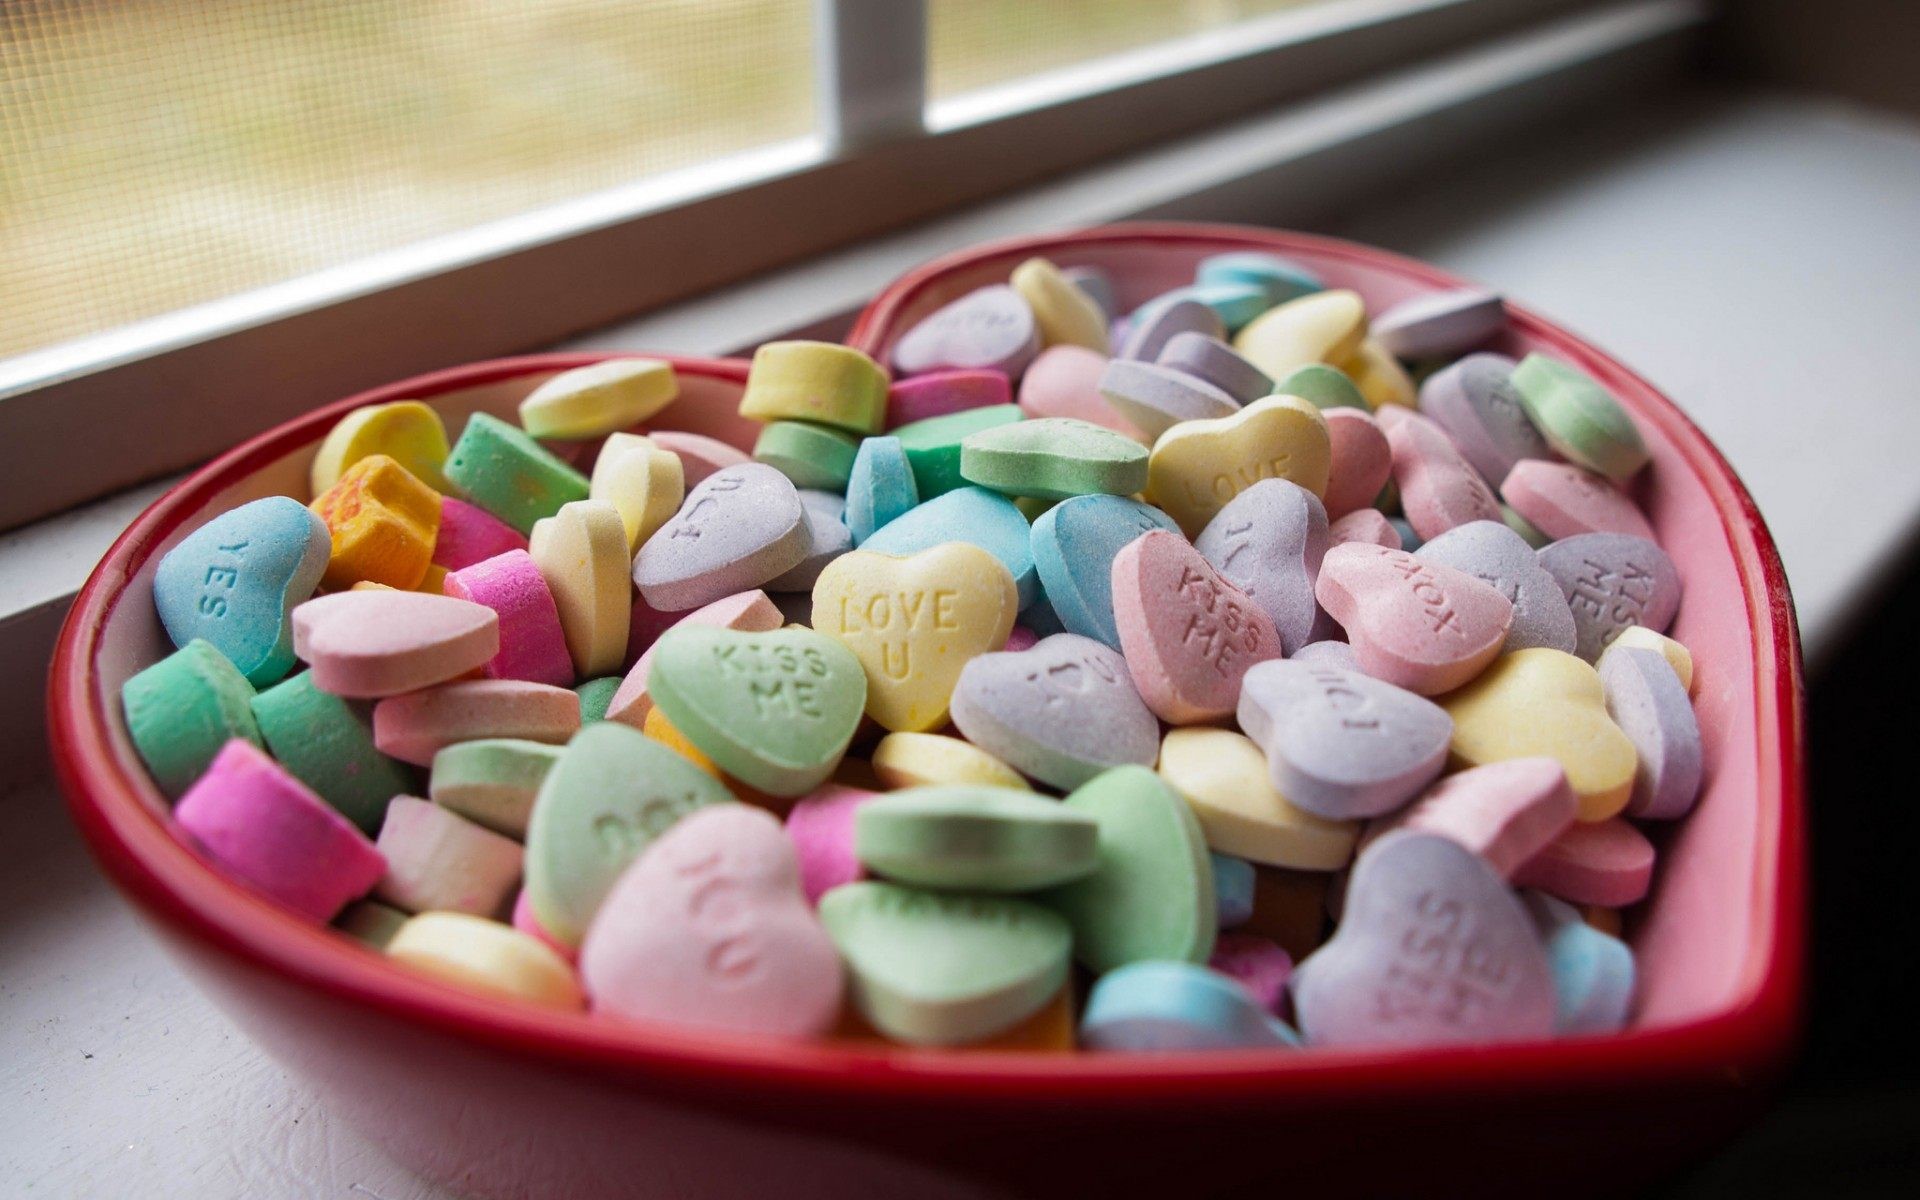 1920x1200 Love Candy Hearts Wallpaper